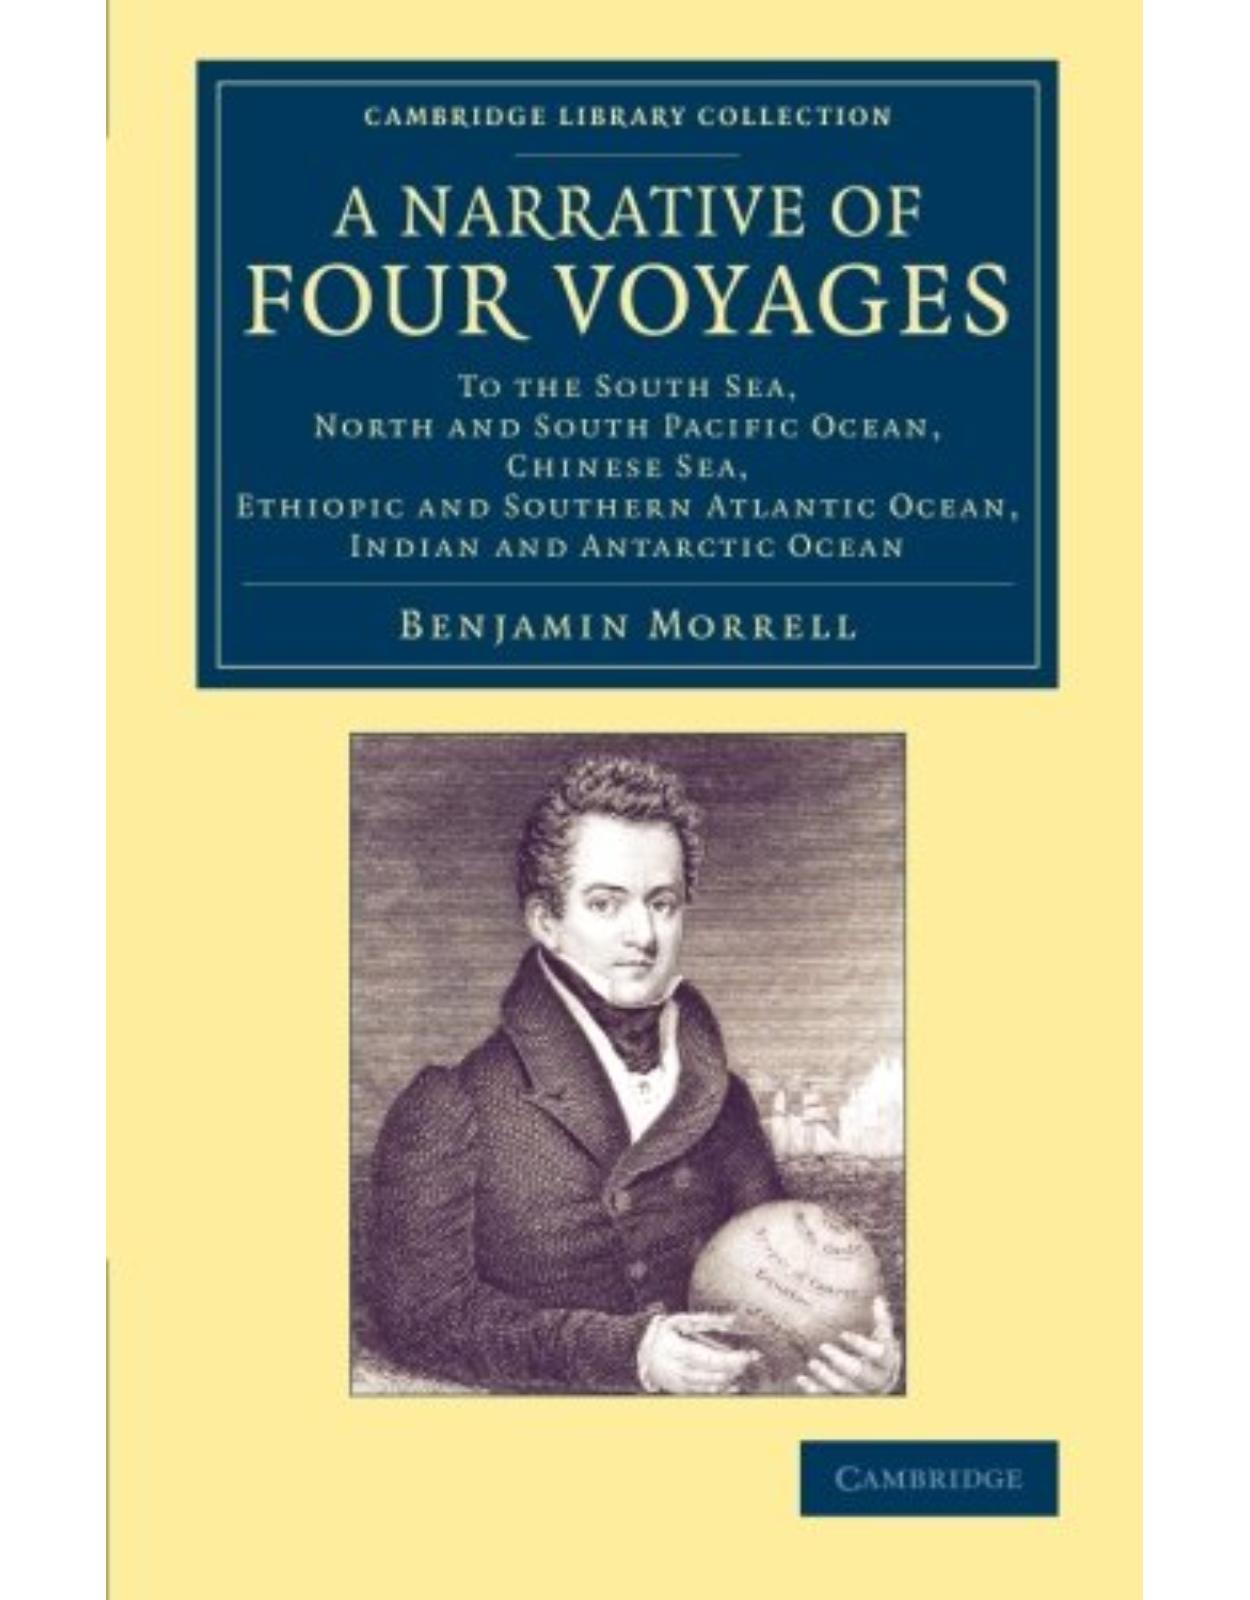 A Narrative of Four Voyages: To the South Sea, North and South Pacific Ocean, Chinese Sea, Ethiopic and Southern Atlantic Ocean, Indian and Antarctic ... Library Collection - Maritime Exploration) 